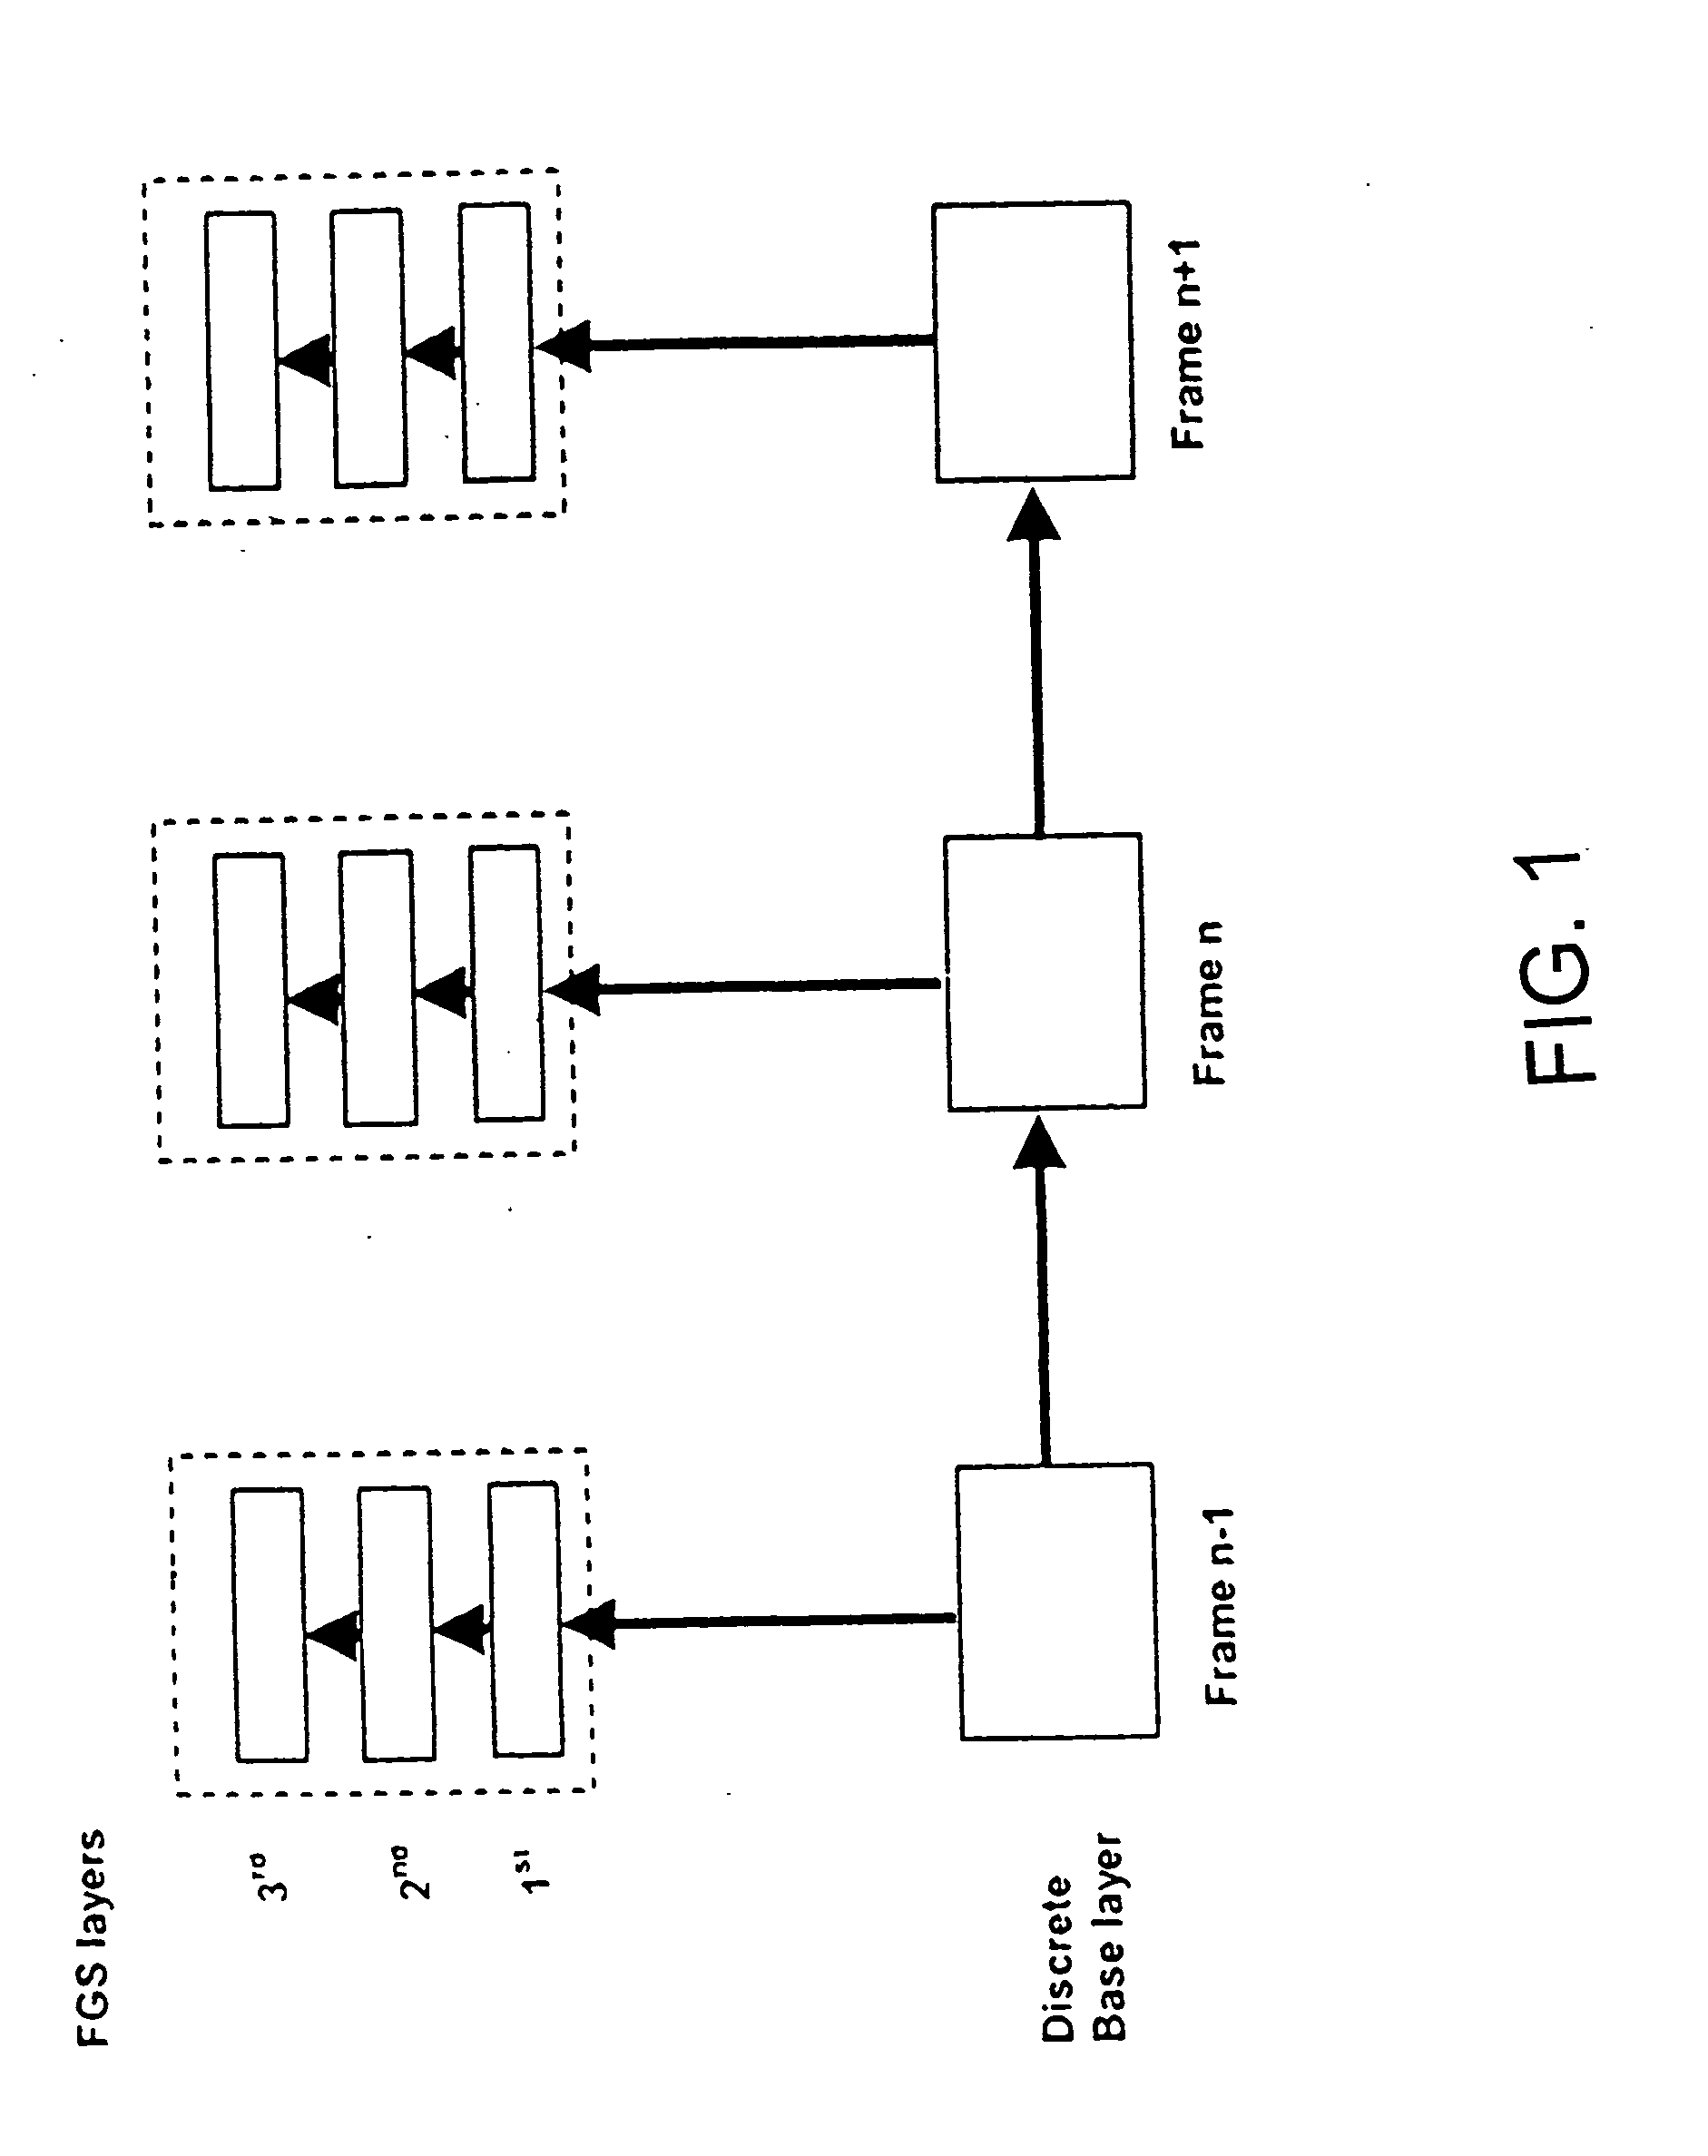 System and apparatus for low-complexity fine granularity scalable video coding with motion compensation